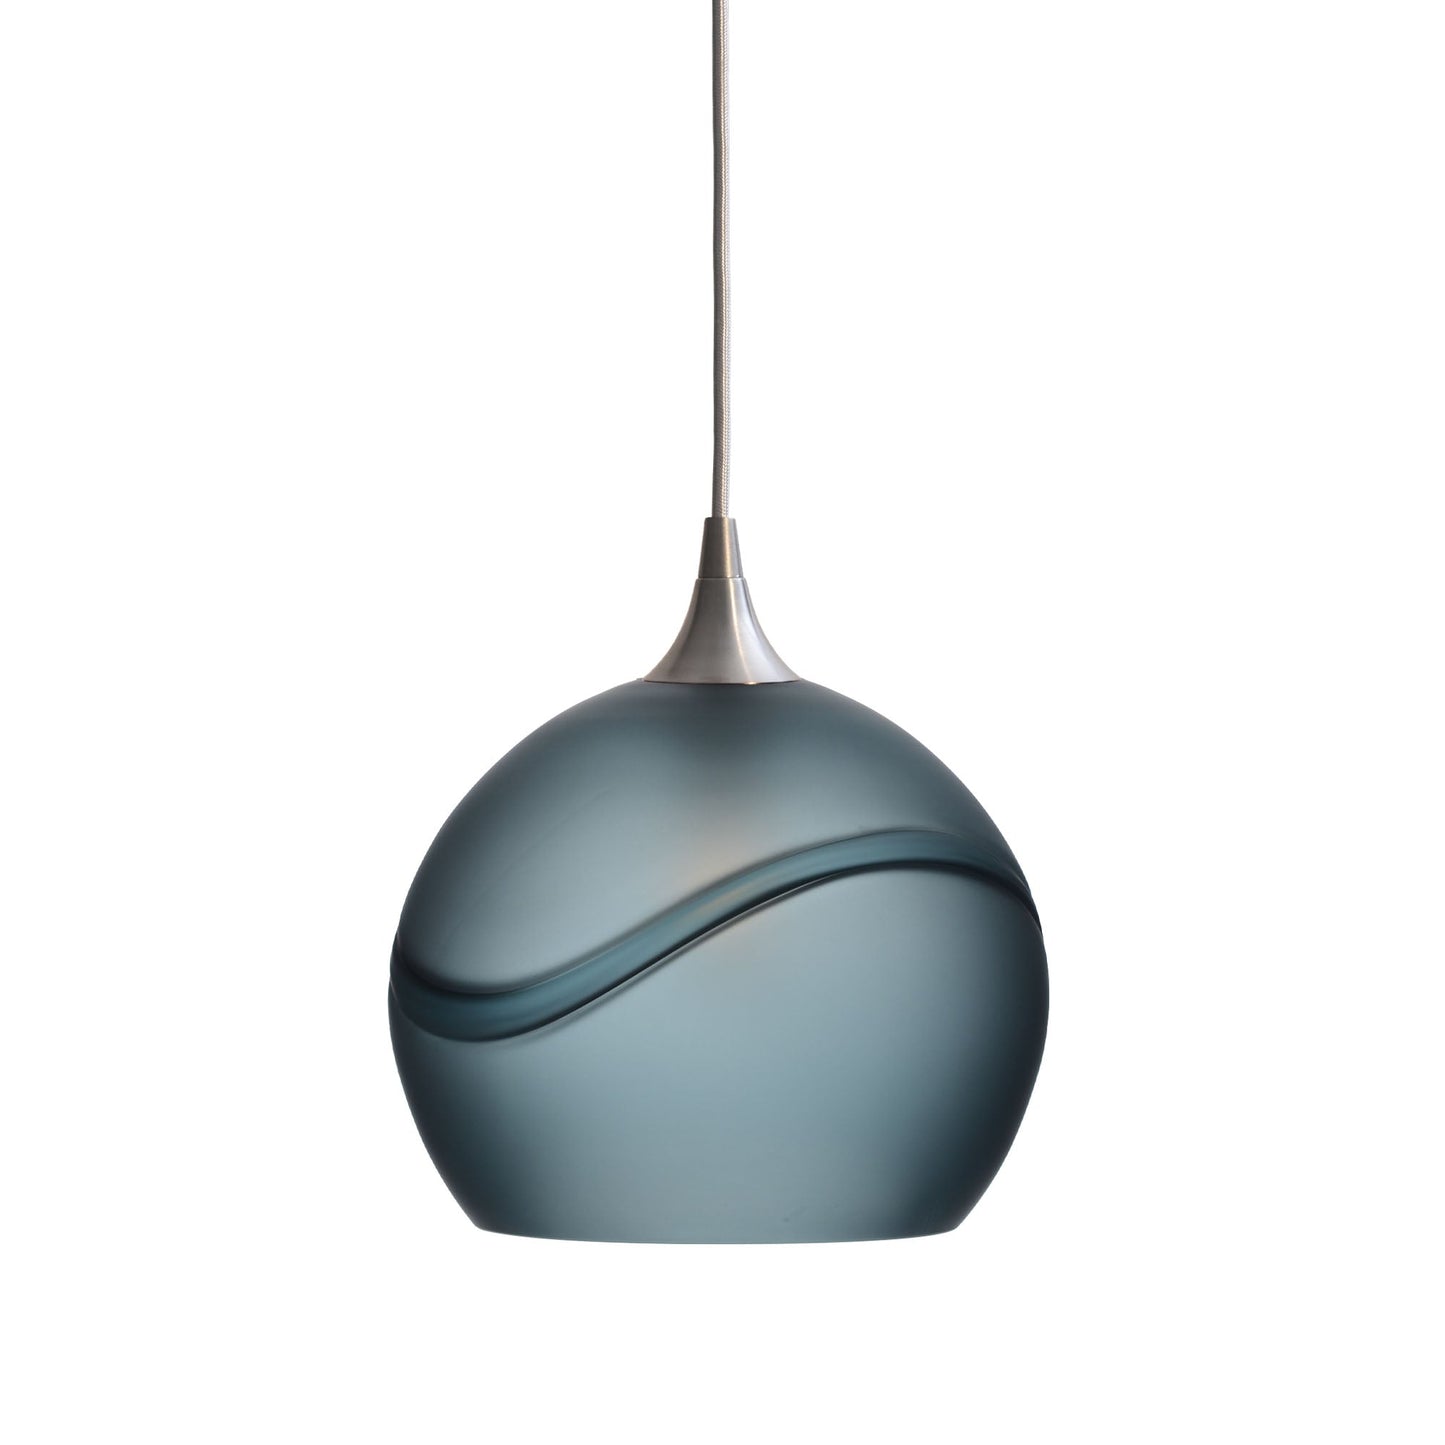 768 Glacial: Single Pendant Light-Glass-Bicycle Glass Co - Hotshop-Slate Gray-Brushed Nickel-Bicycle Glass Co